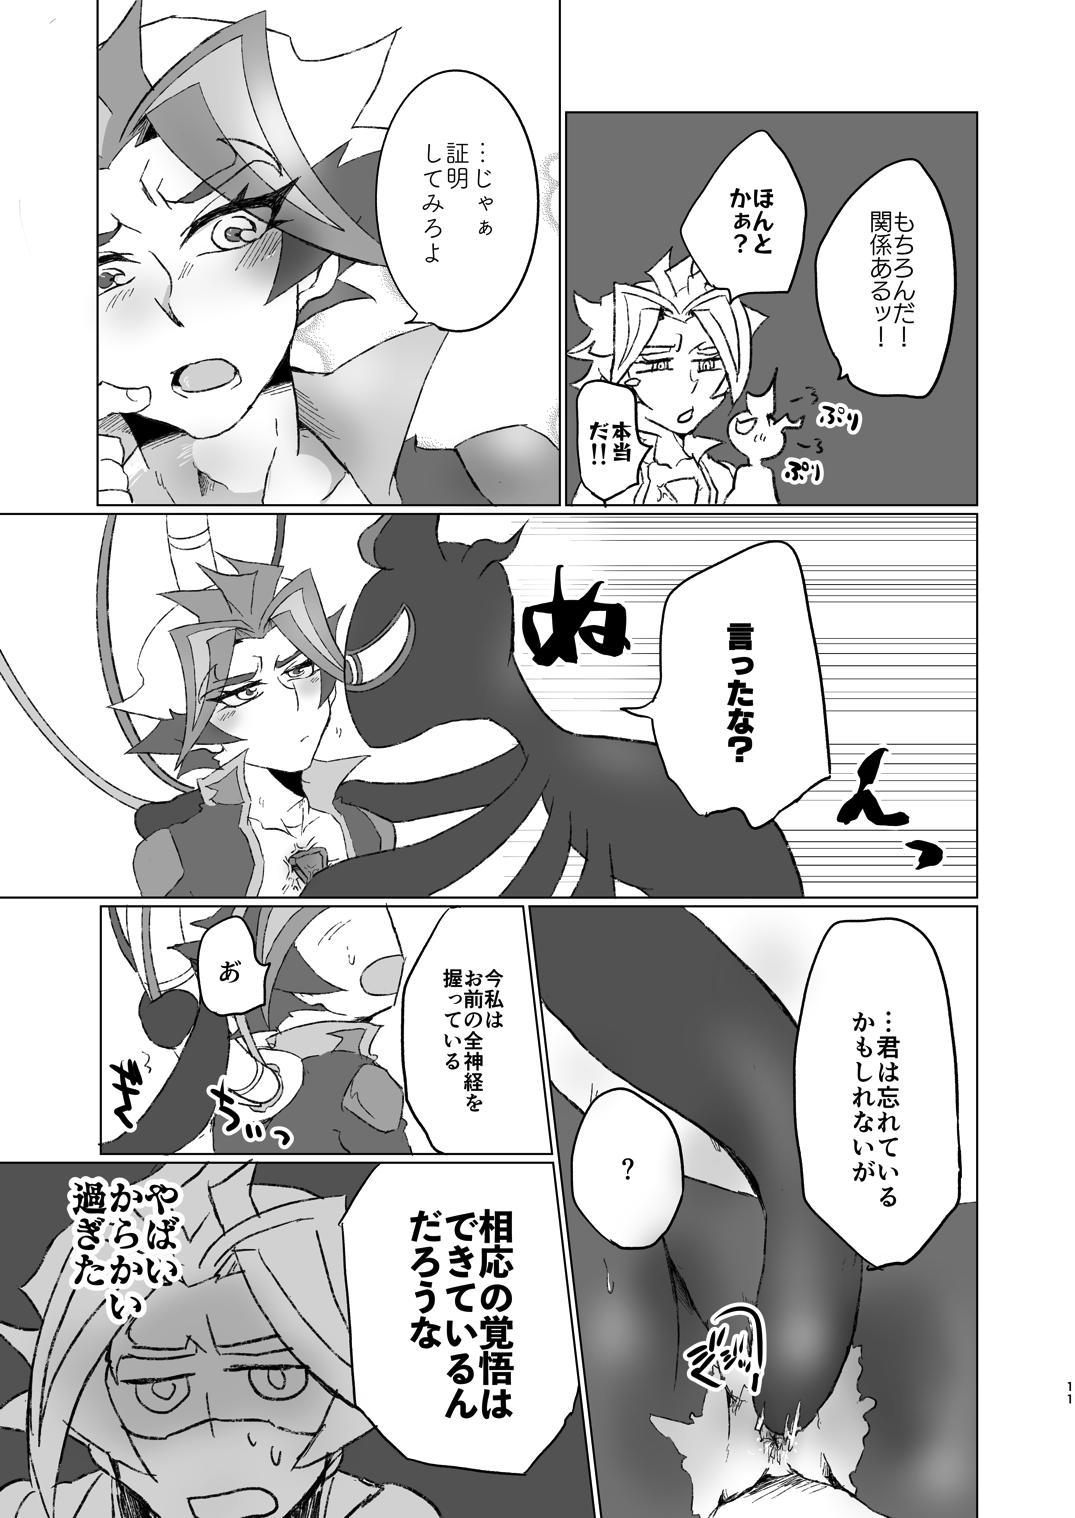 Leather A little bit further - Yu-gi-oh vrains Porn - Page 10